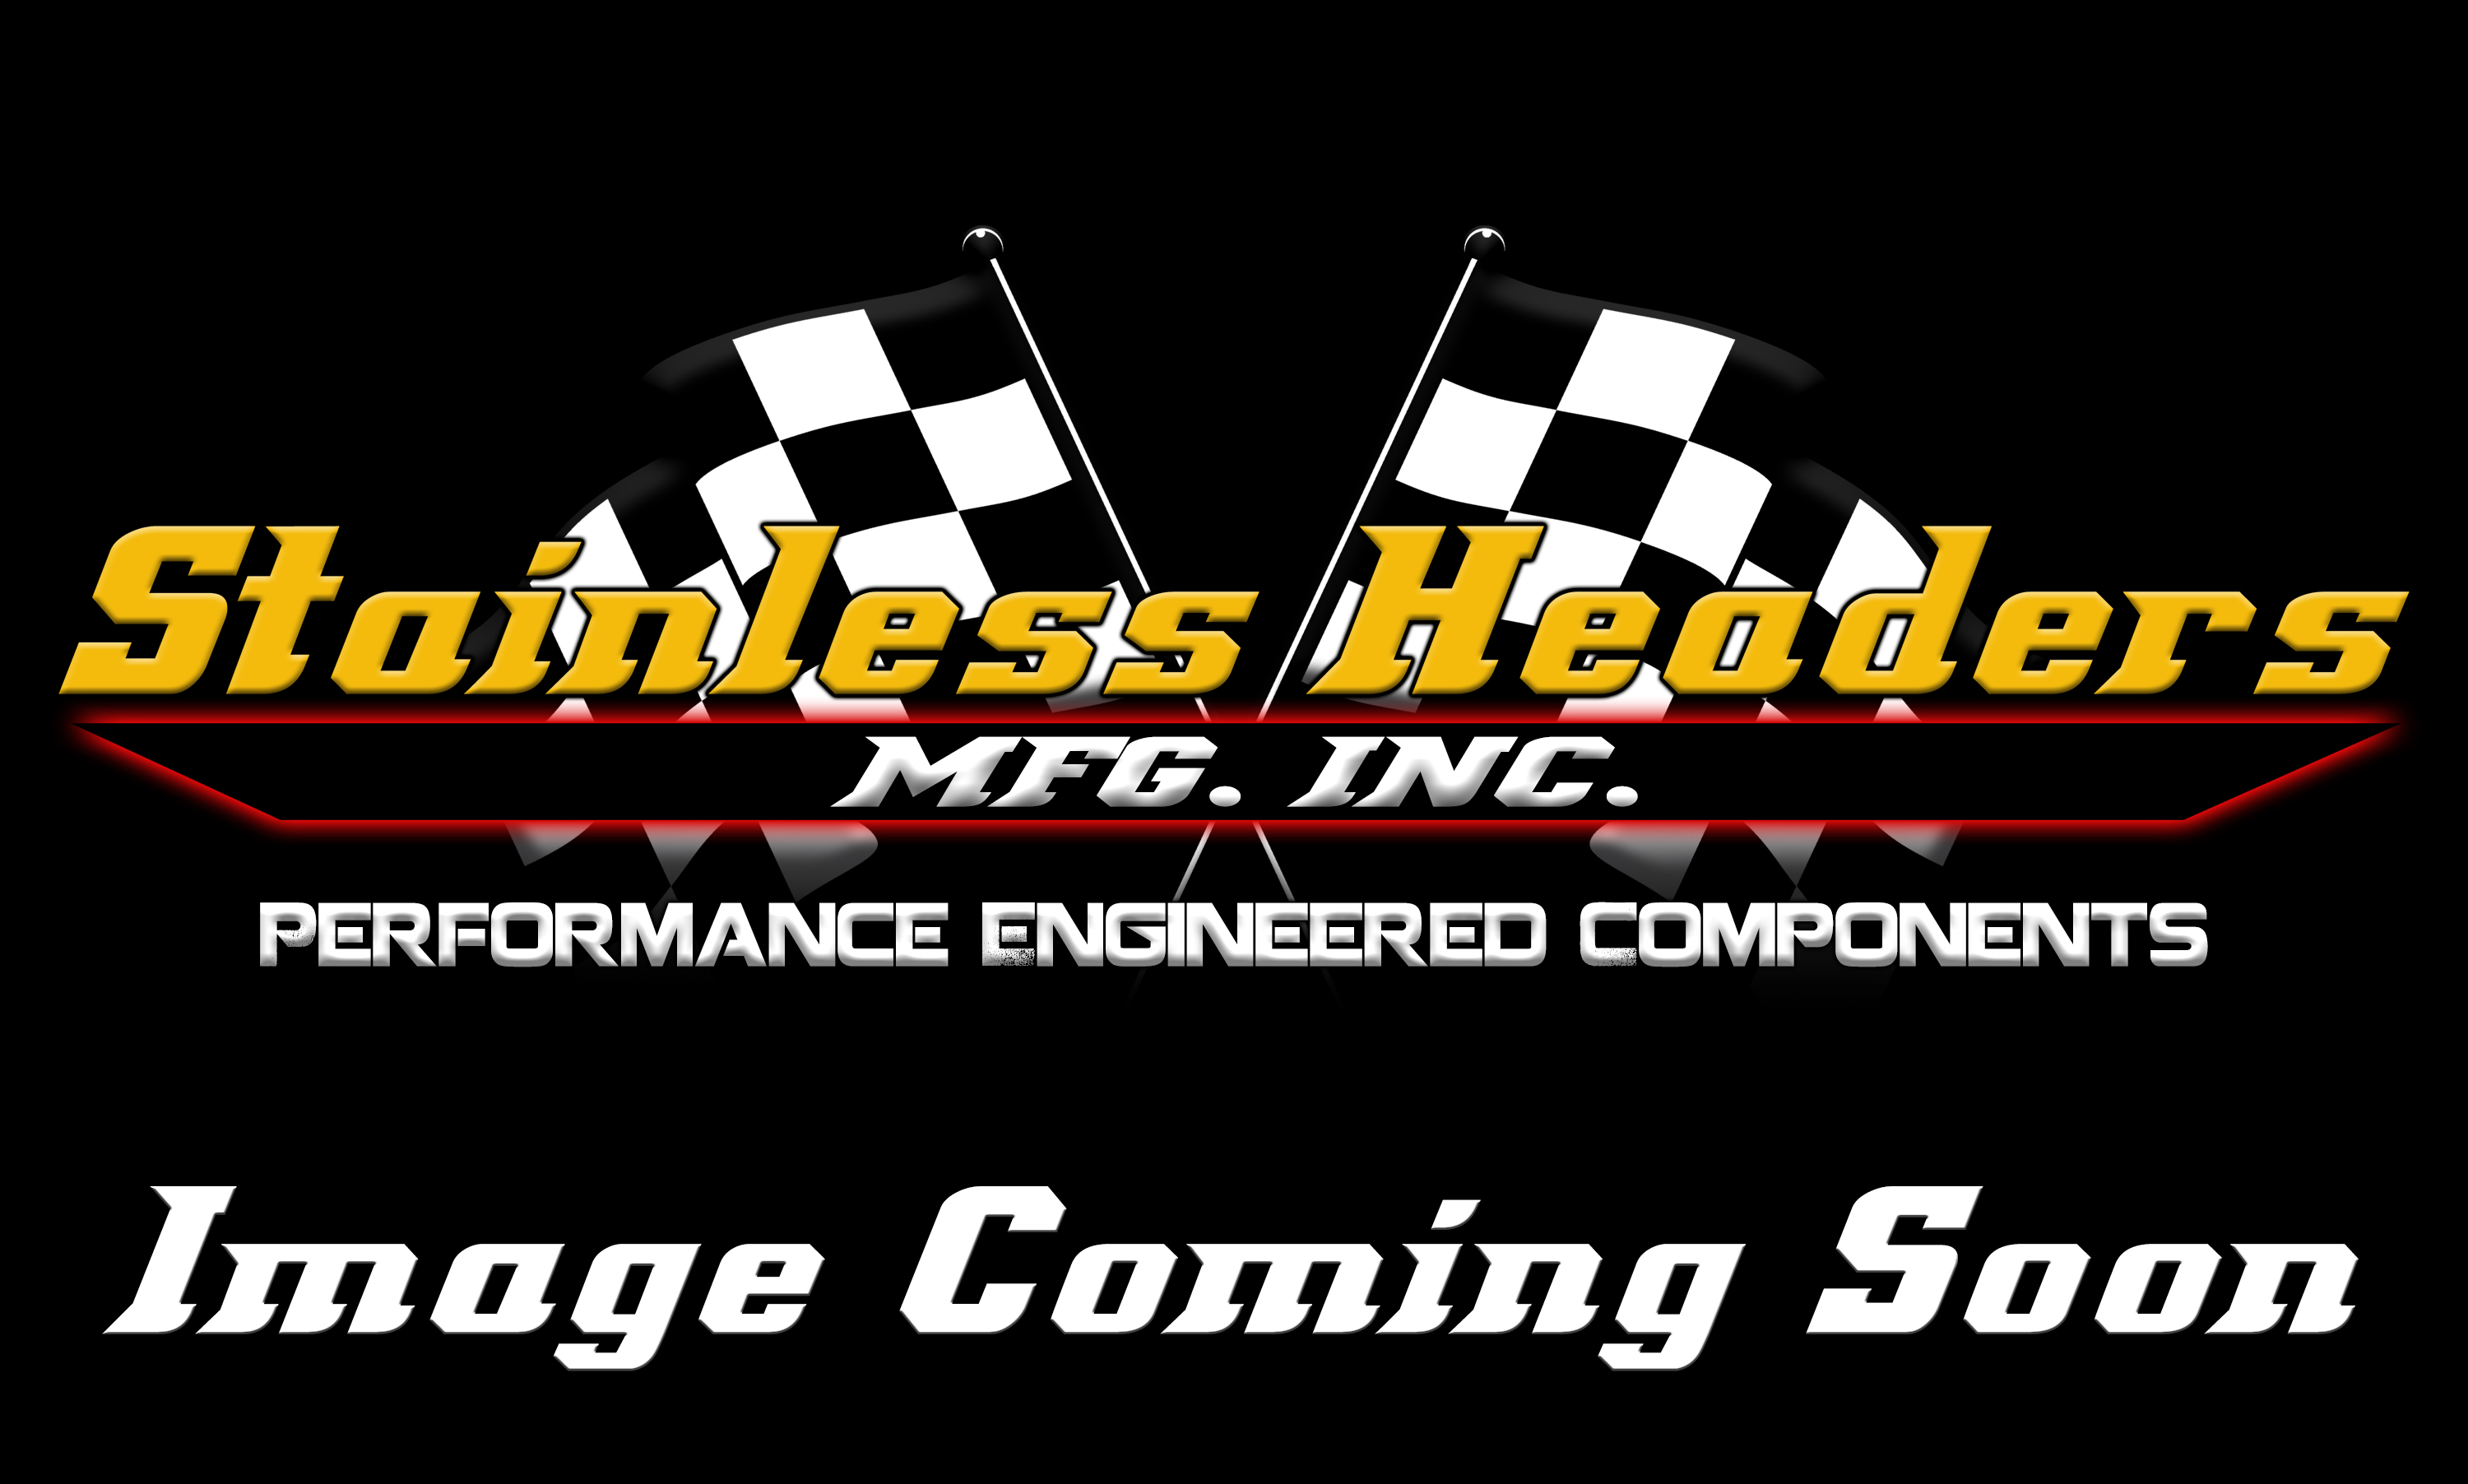 Stainless Headers - 1 1/2" Primary 4 into 1 Performance Merge Collector-16ga 321ss